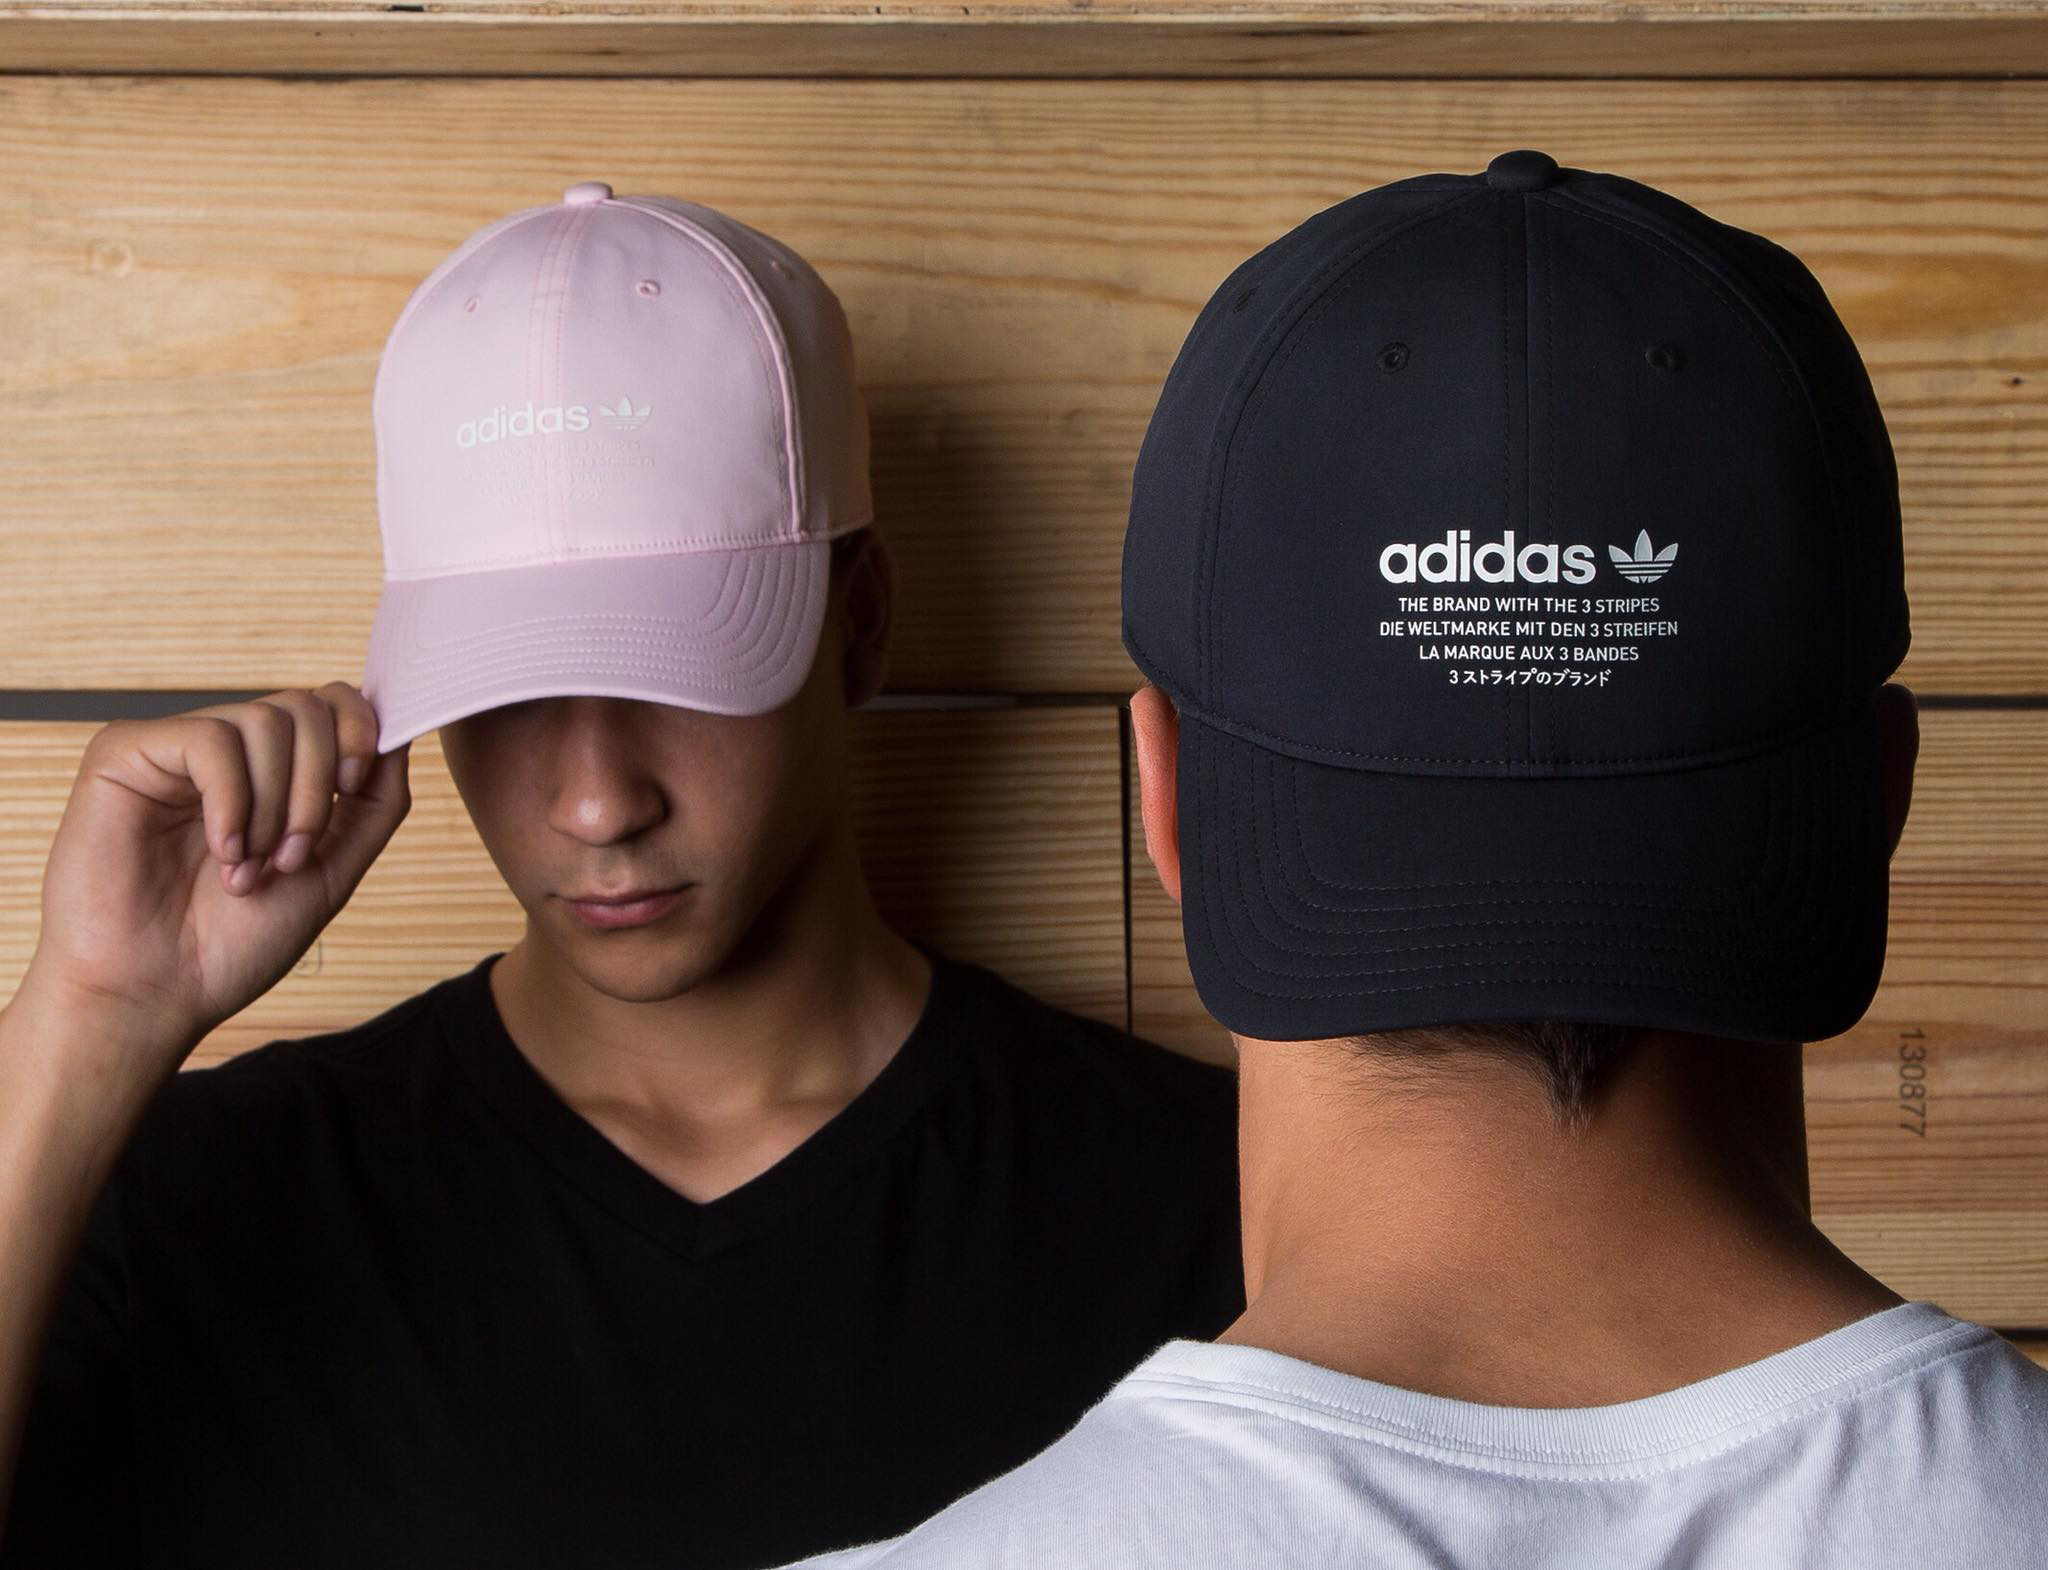 adidas the brand with the 3 stripes hat